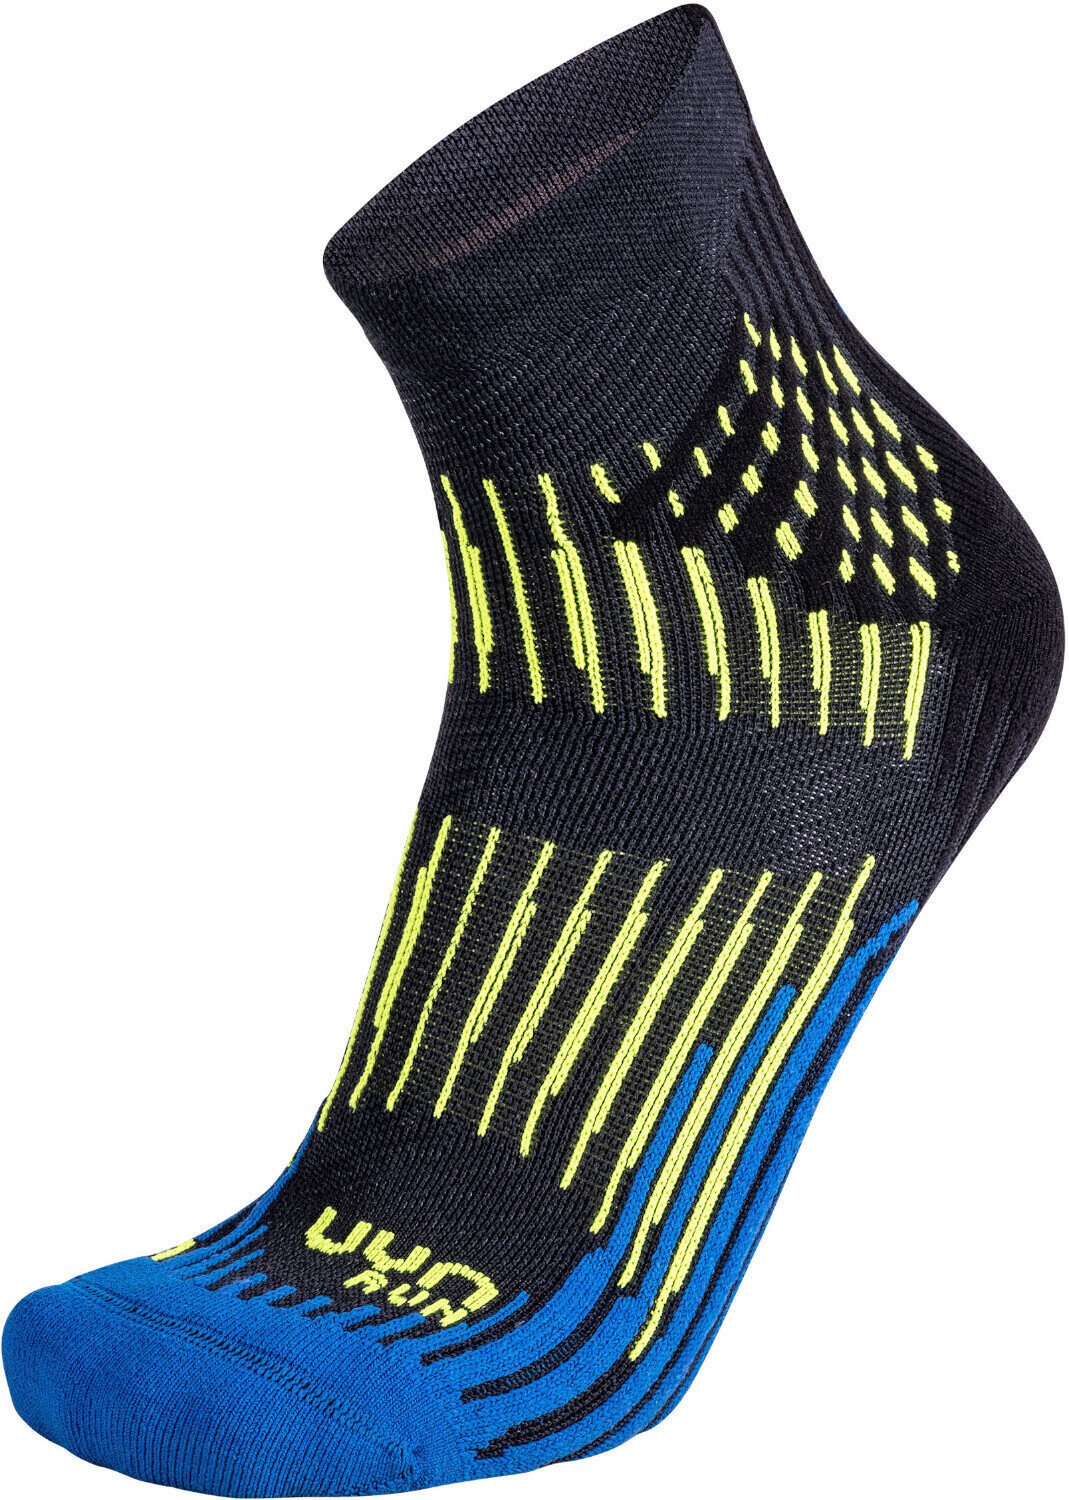 Calcetines para correr UYN Run Shockwave Anthracite-Royal Blue-Yellow Fluo 39/41 Calcetines para correr